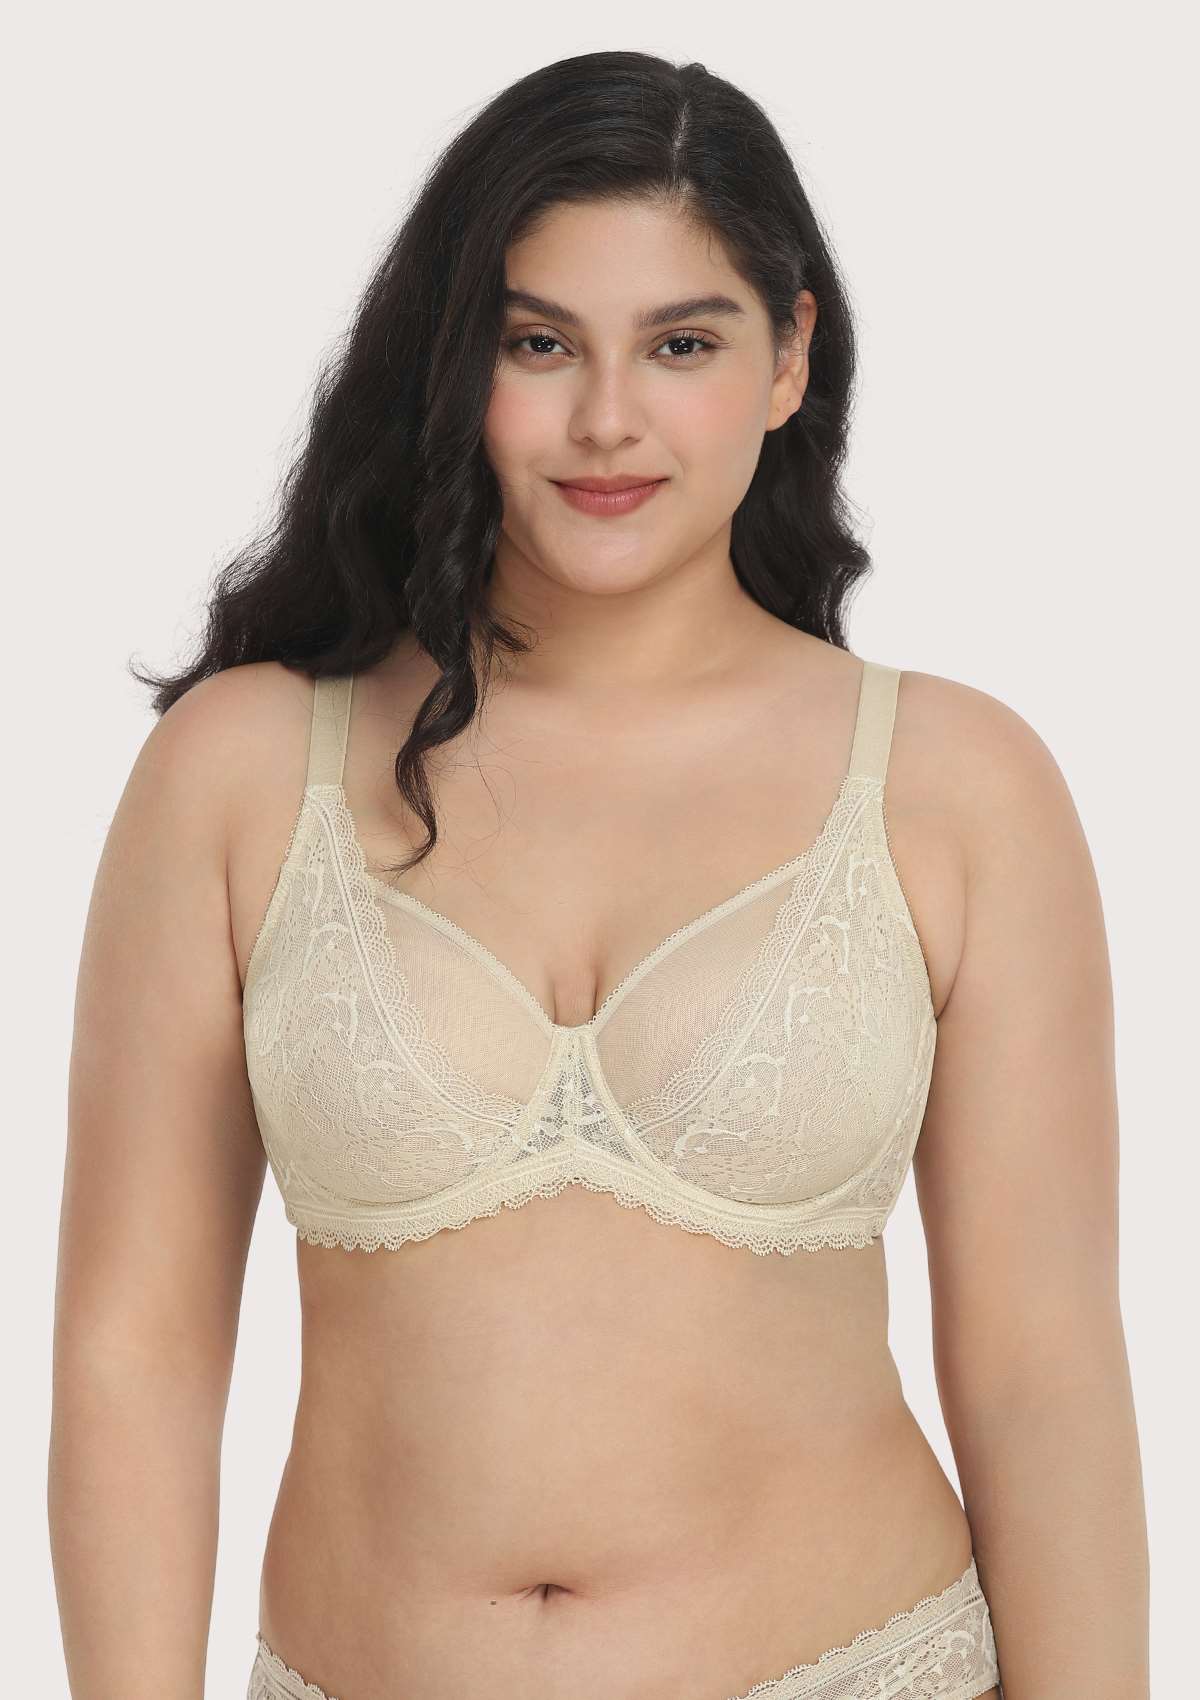 HSIA Anemone Lace Unlined Bra: Supportive, Lightweight Bra - Champagne / 42 / C